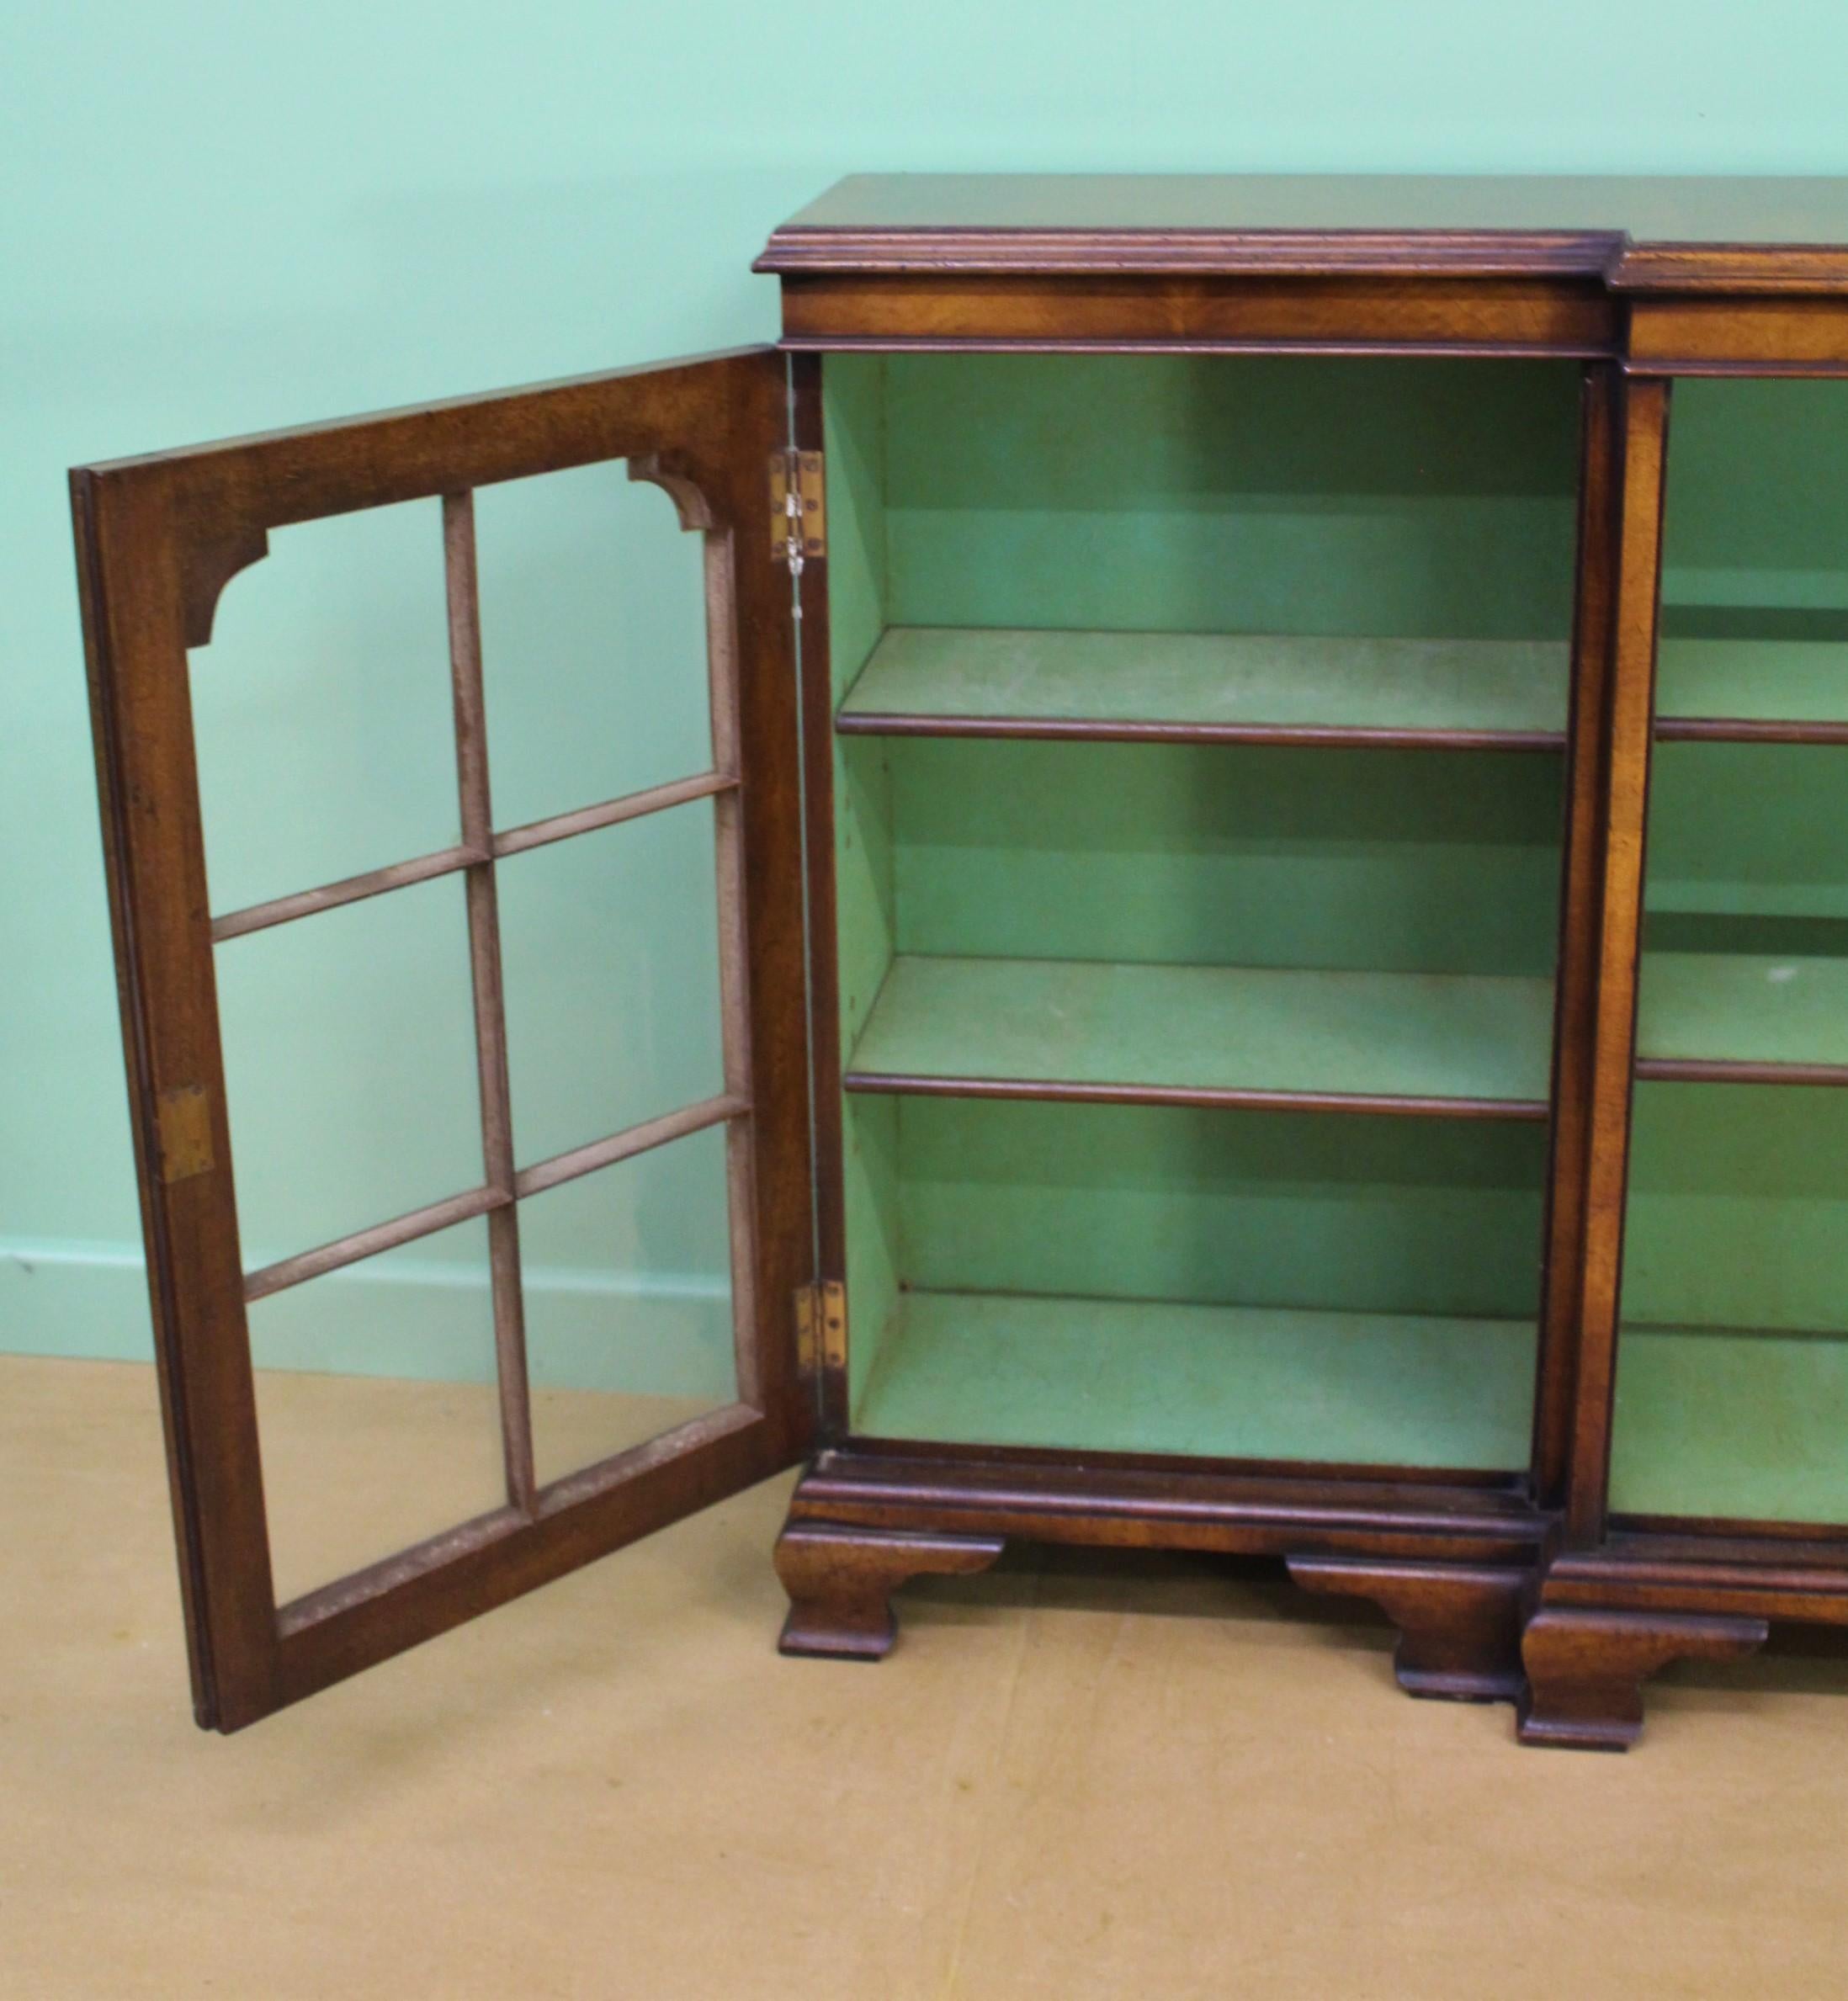 English Burr Walnut Break Front Bookcase In Good Condition For Sale In Poling, West Sussex